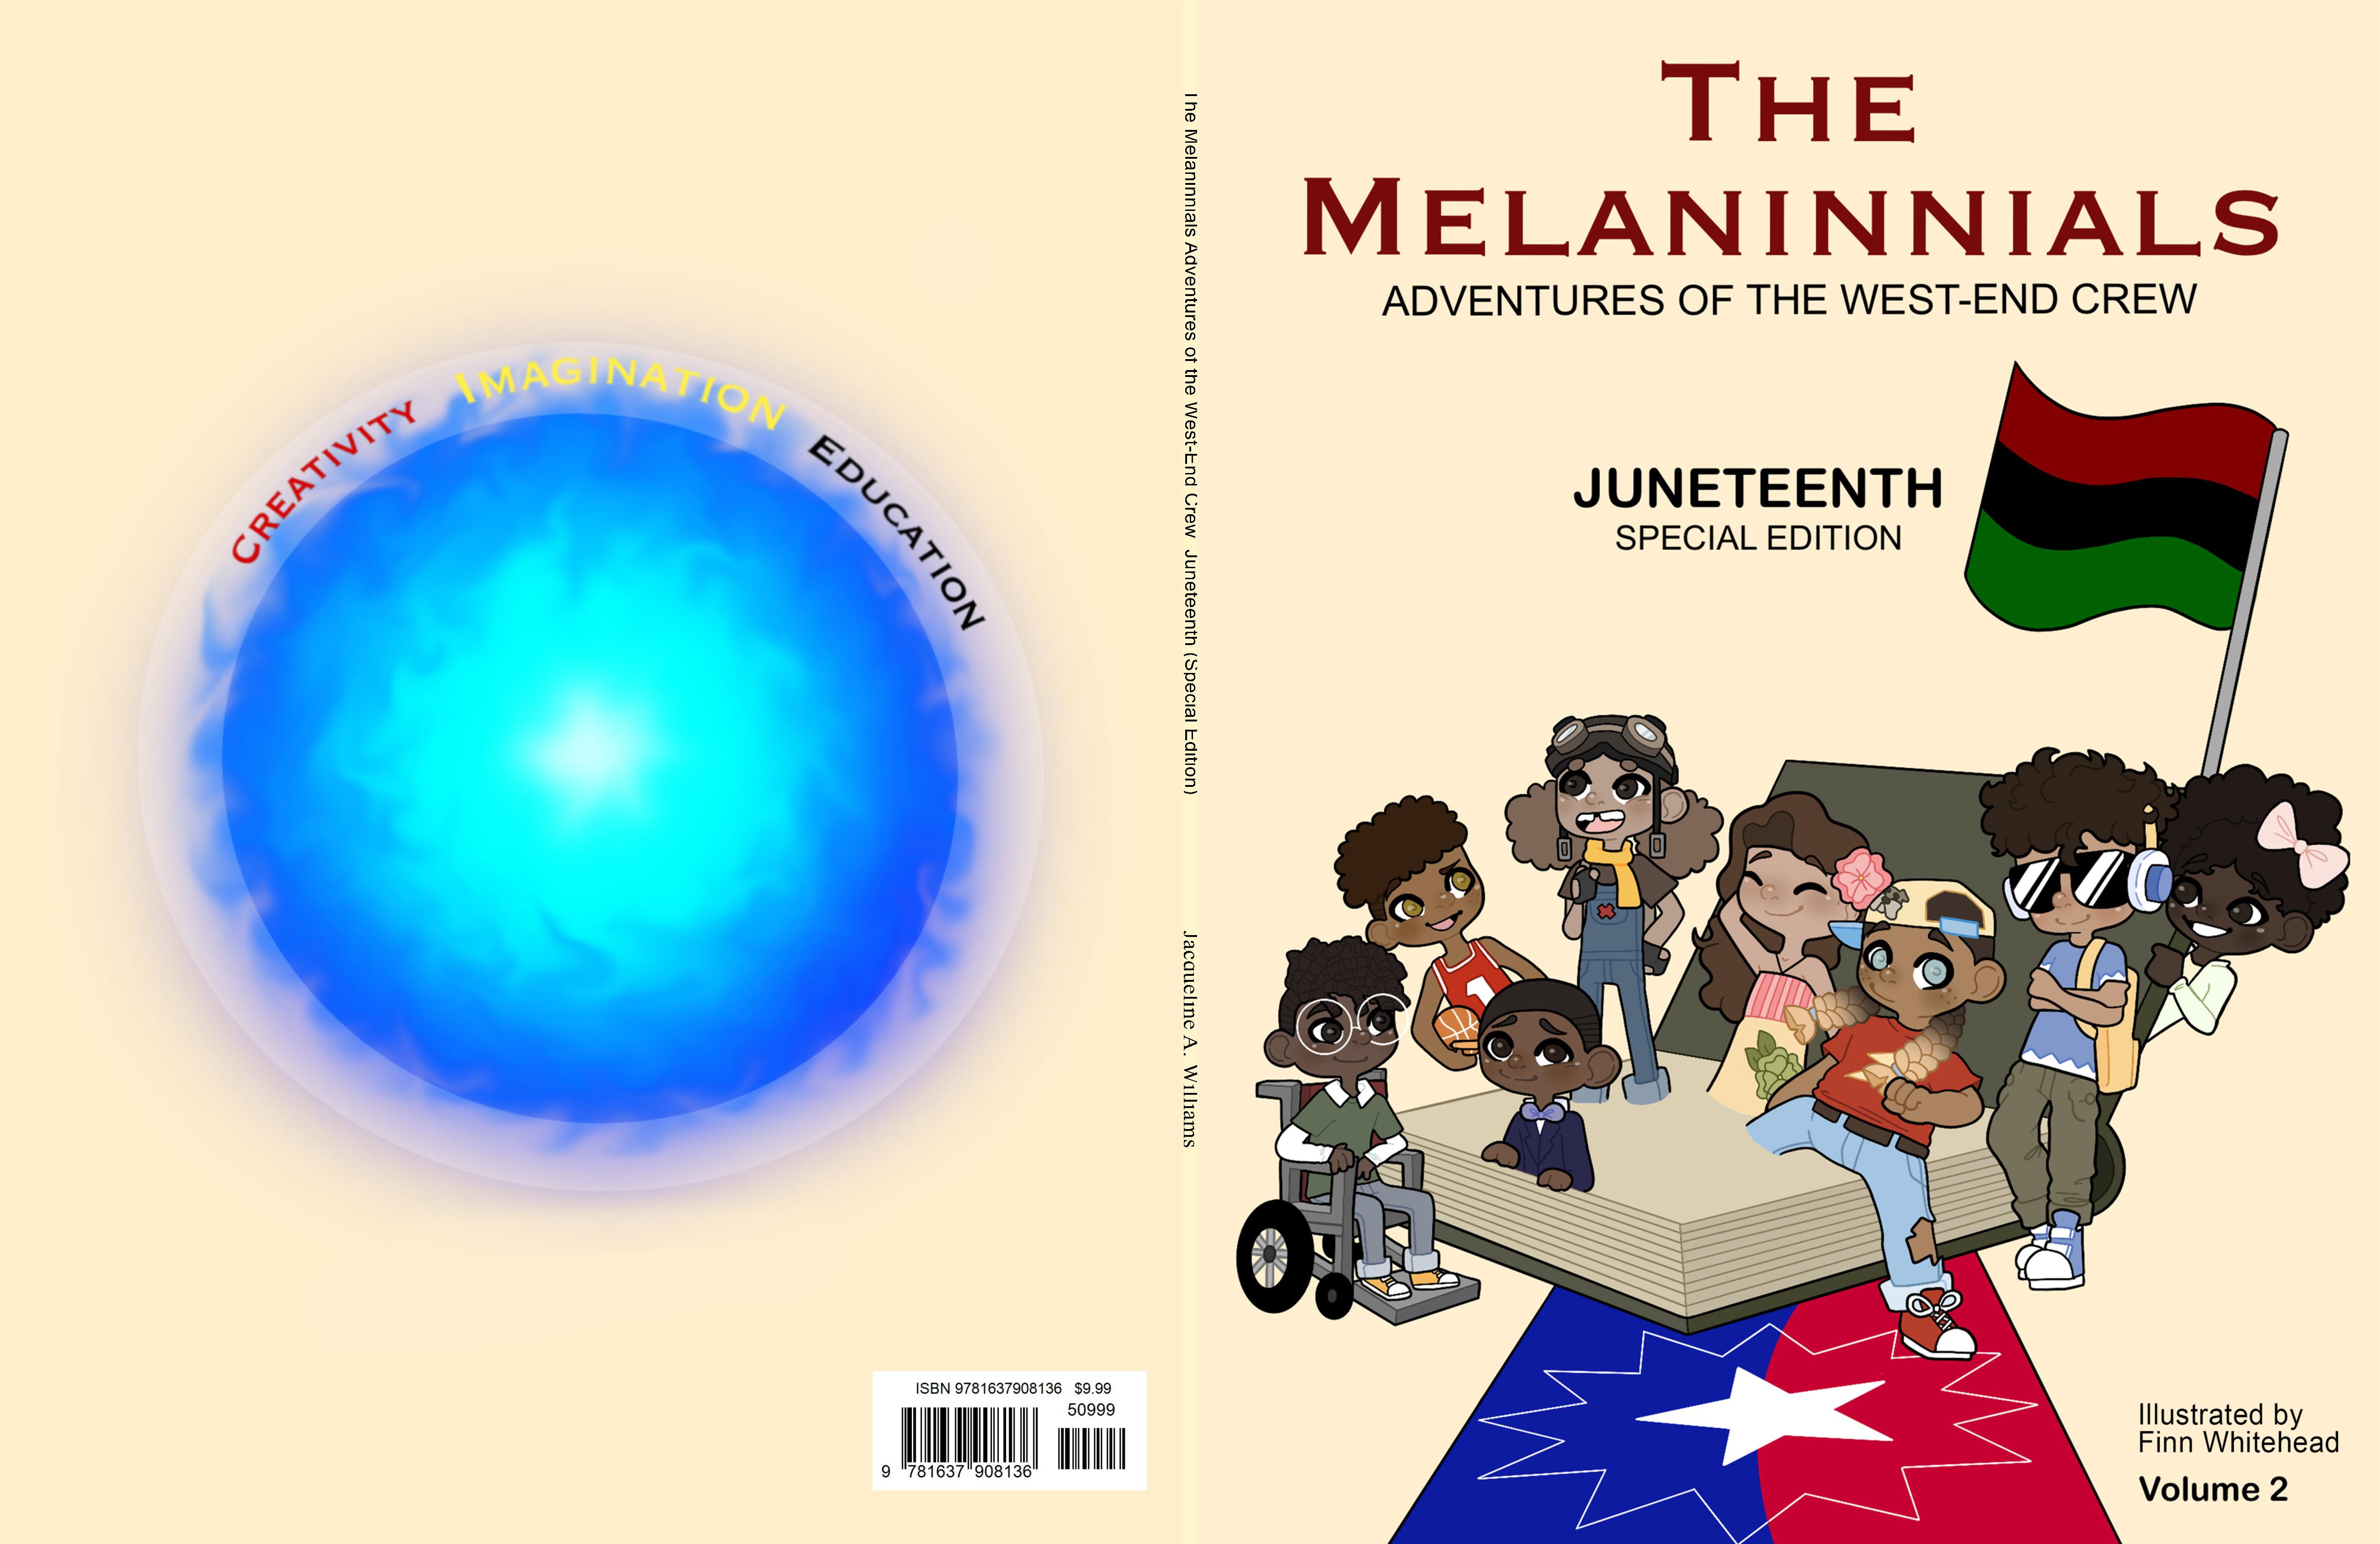 The Melaninnials Adventures of the West-End Crew  Juneteenth (Special Edition) cover image